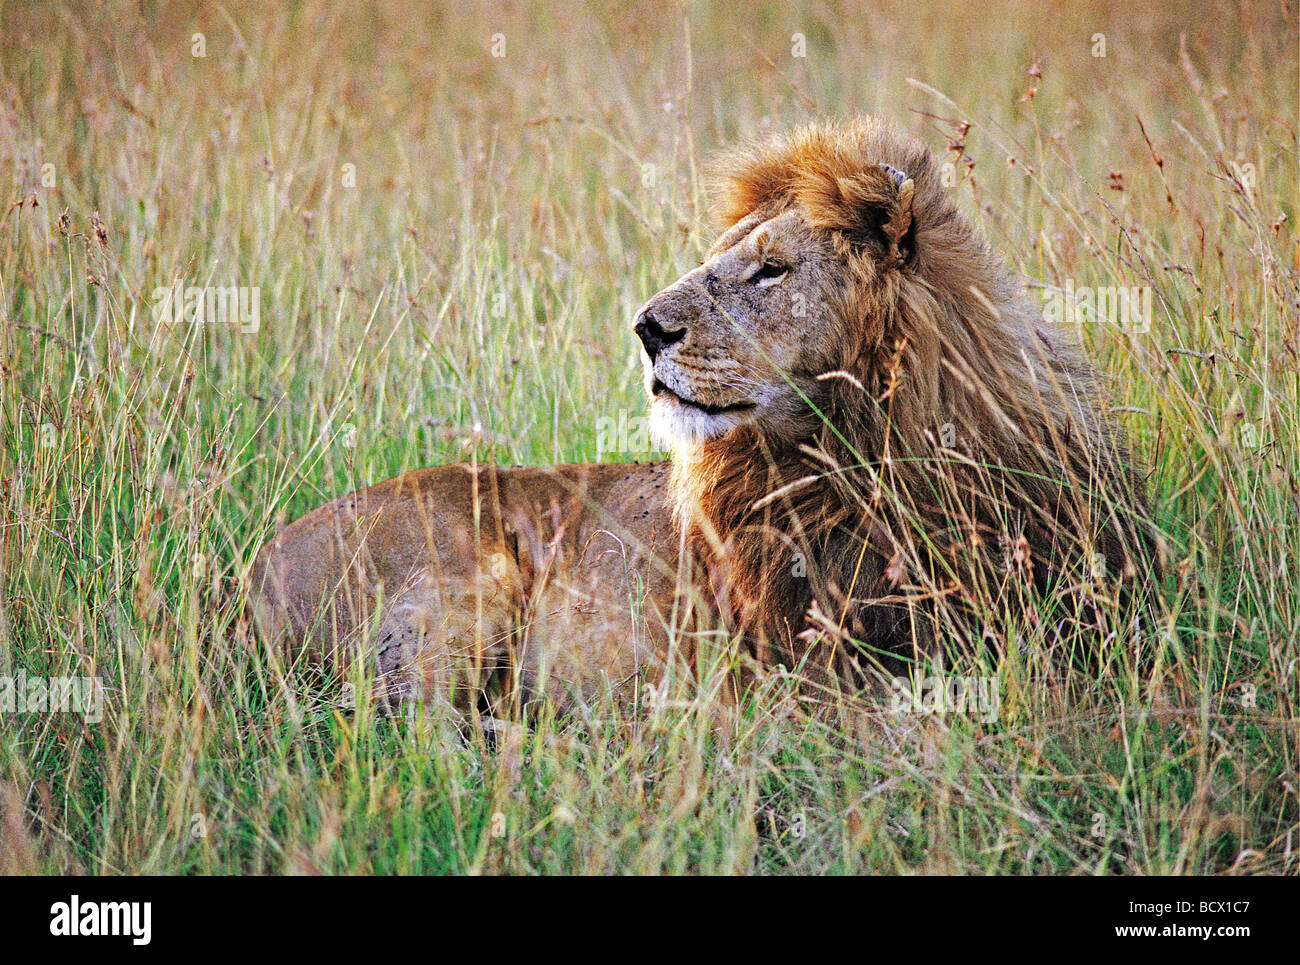 Alert male Lion with his head up resting in long grass Masai Mara National Reserve Kenya East Africa Stock Photo